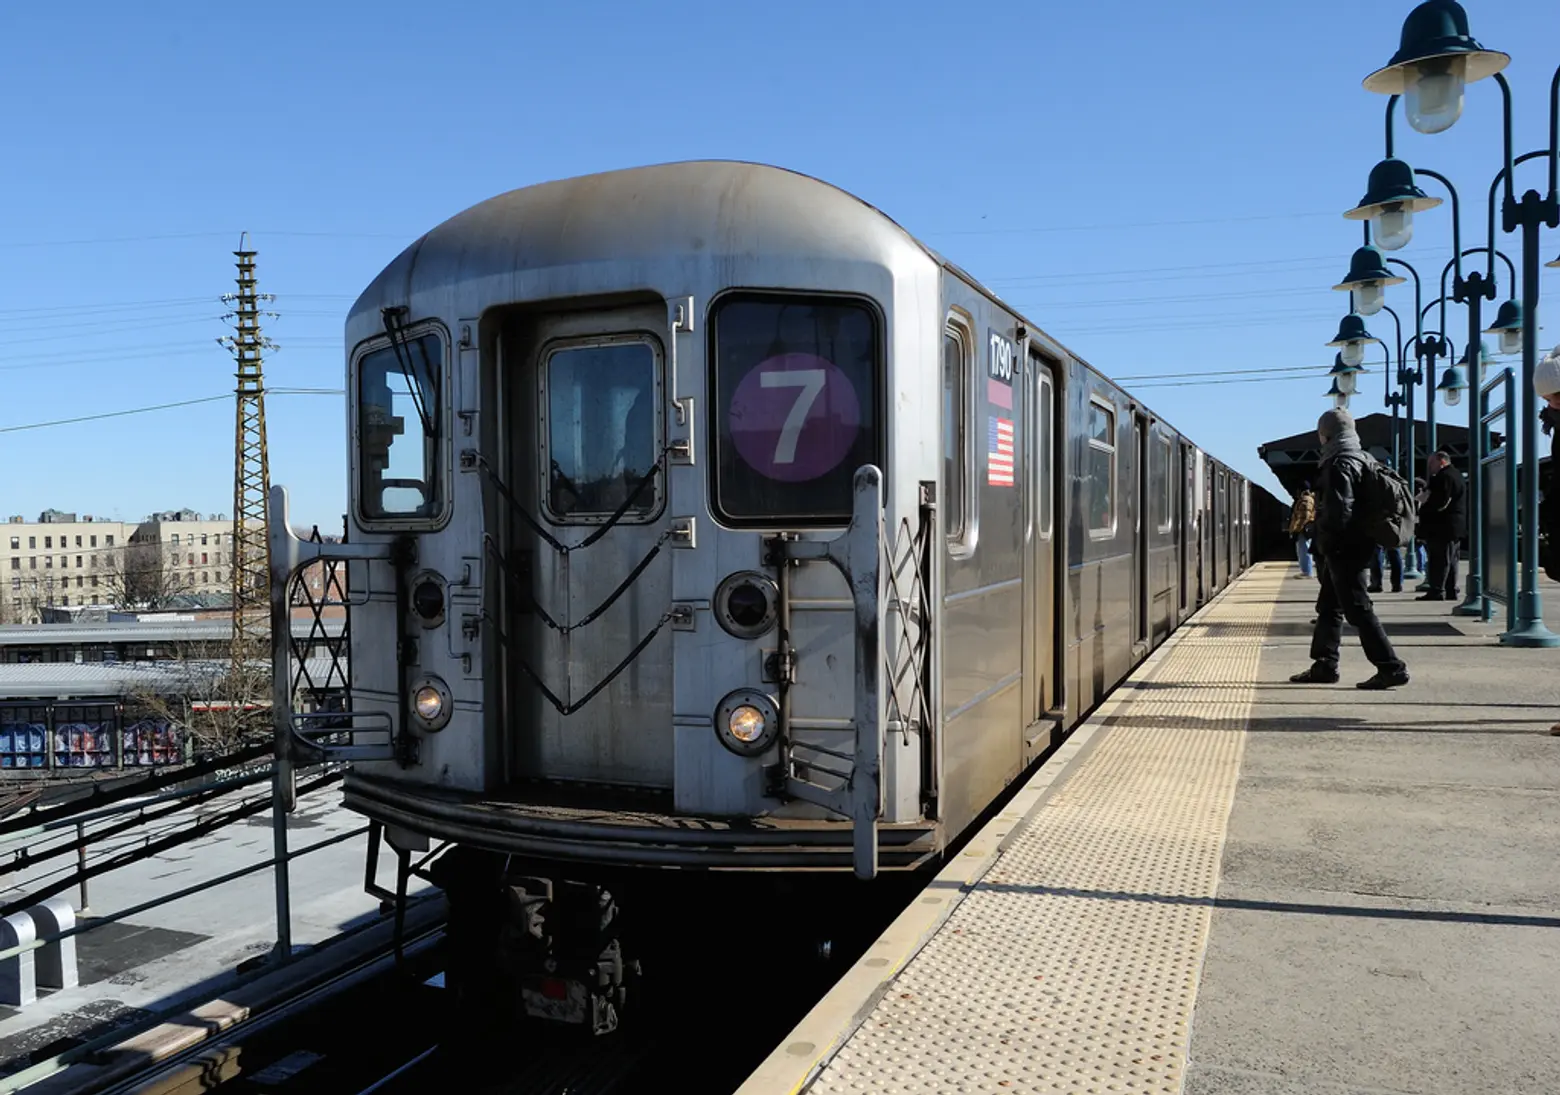 New signals on the 7 line fail on first day system goes live